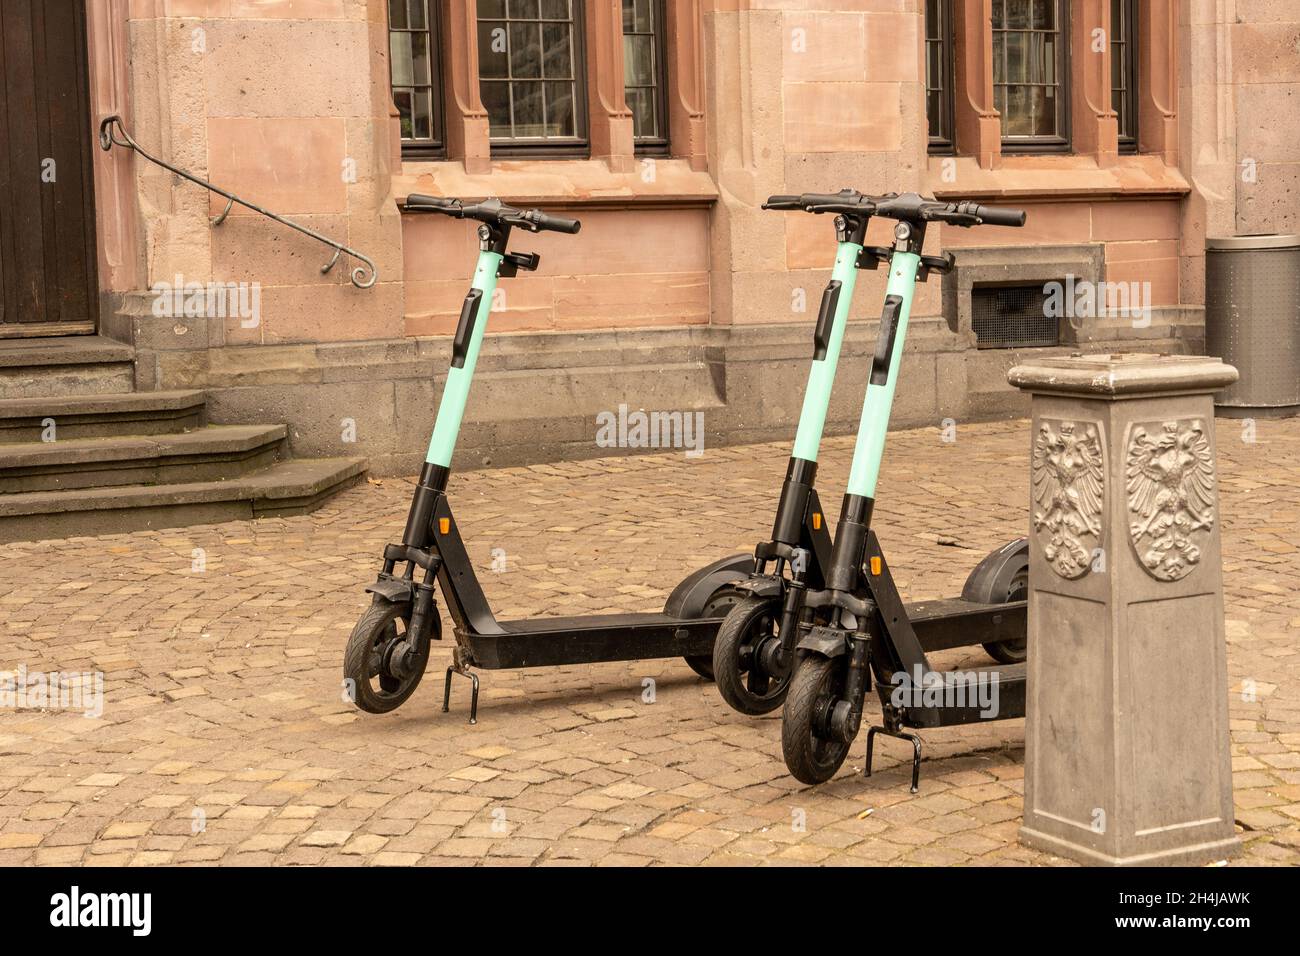 After use, three e-scooters are parked in front of a historic building in the middle of the city Stock Photo